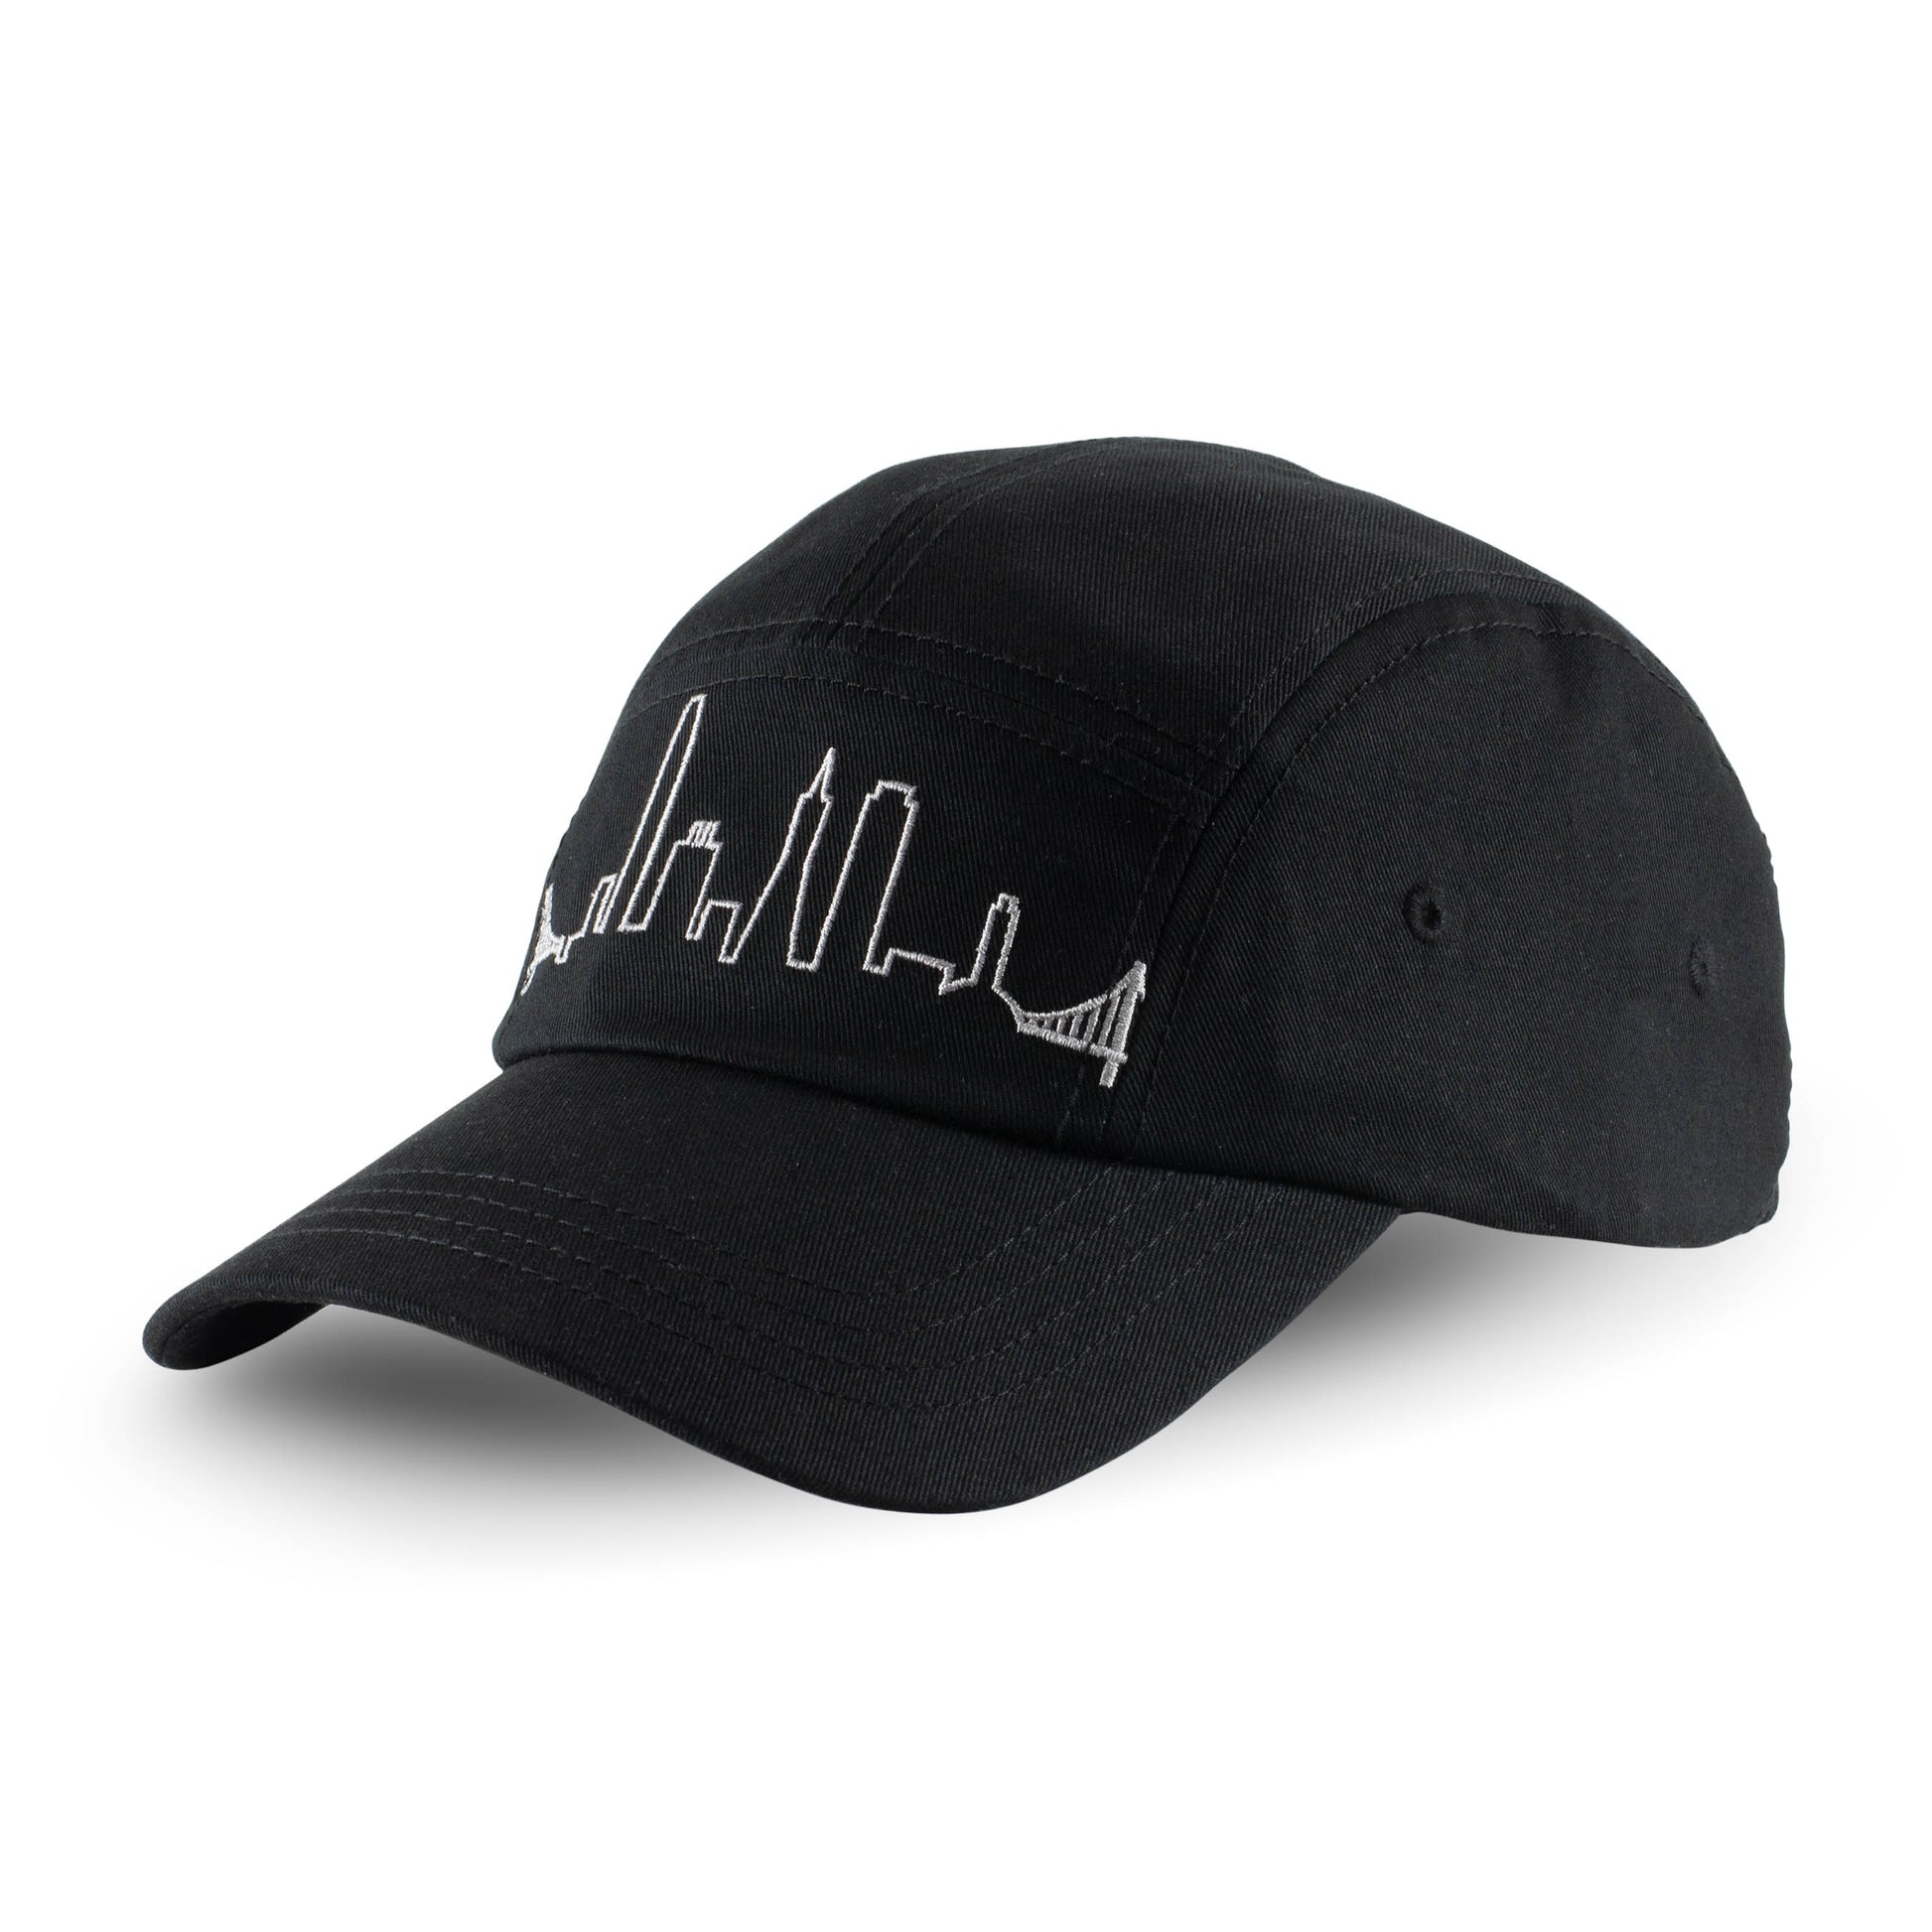 Black baseball cap with silver embroidered design of San Francisco's skyline on front panels.